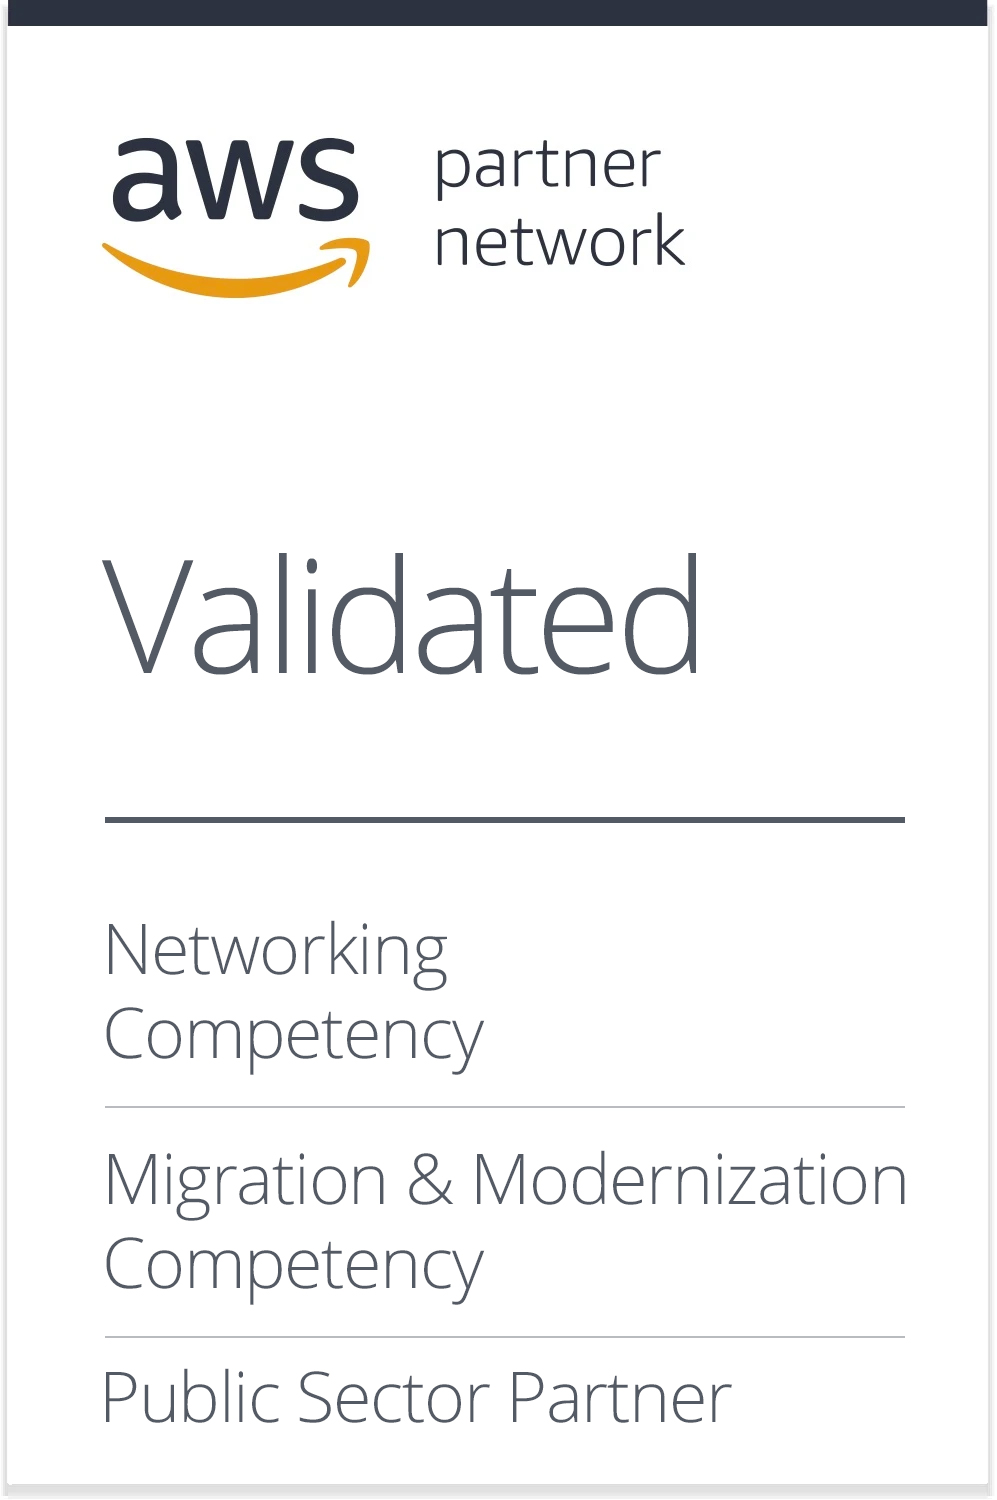 AWS Advanced Technology Partner - Networking Competency, Migration Competency